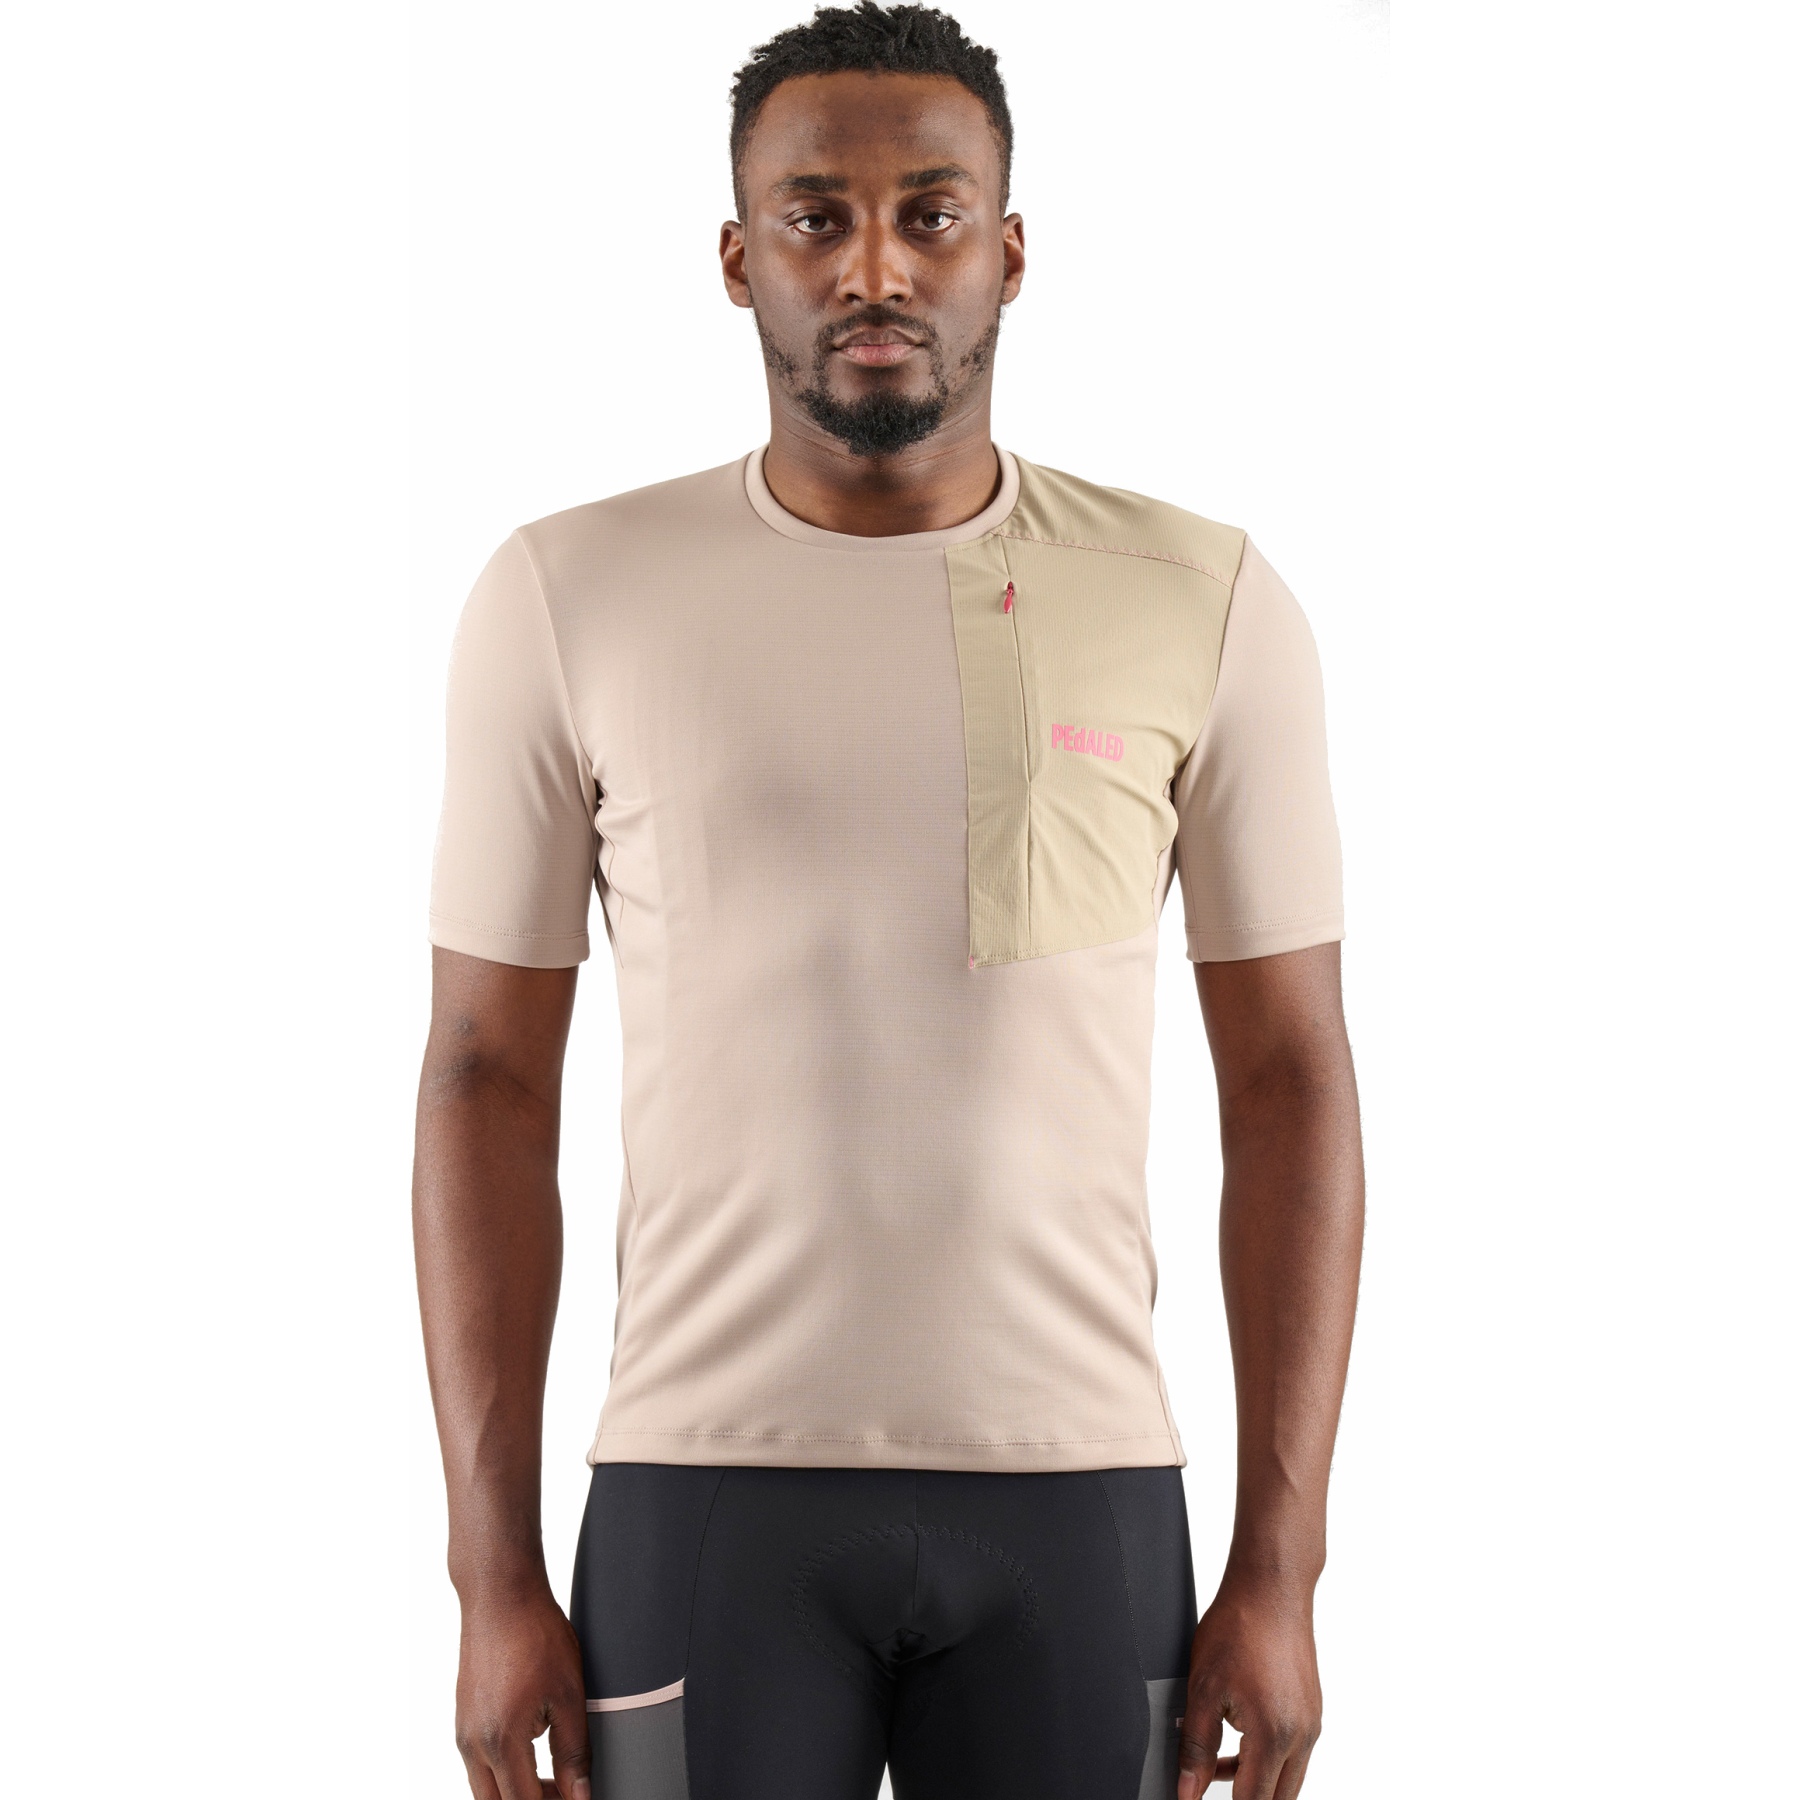 Picture of PEdALED Odyssey Merino Tee Men - Beige